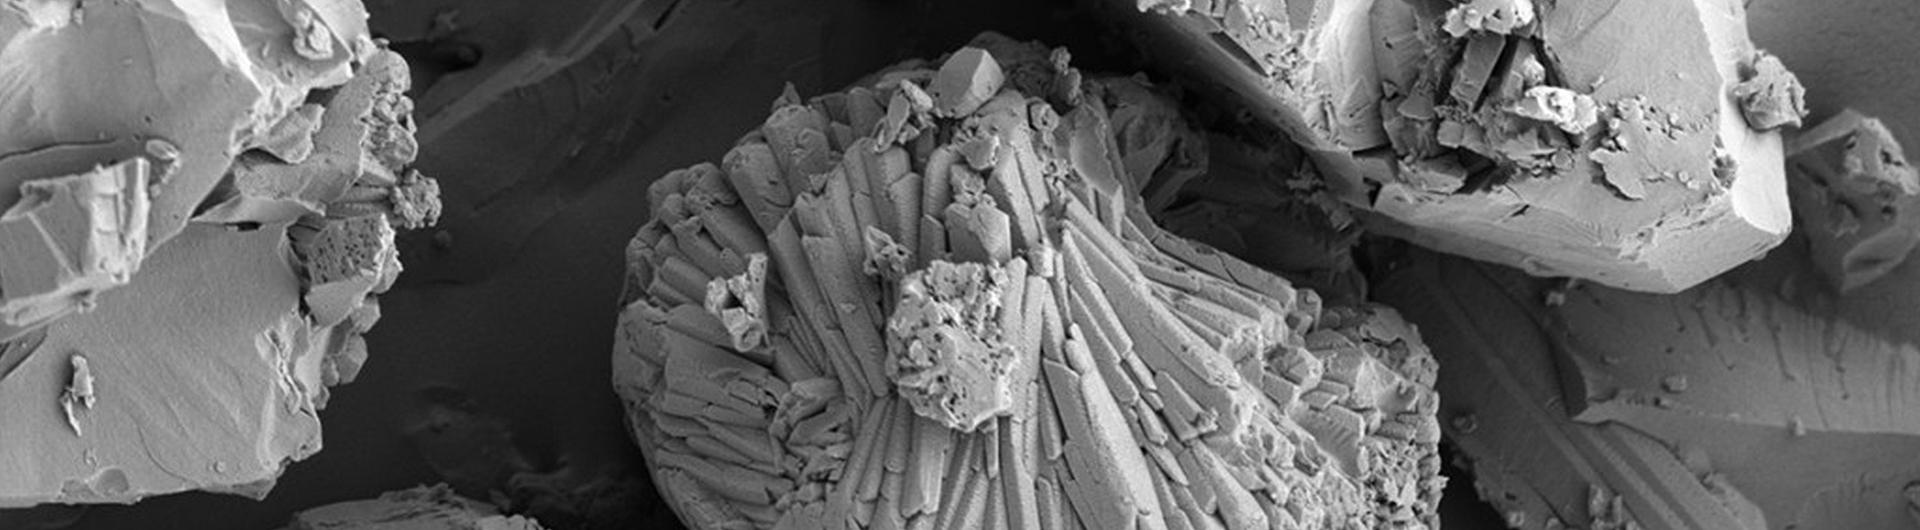 zeolite, a hybrid porous material used to filter methane from landfill gases